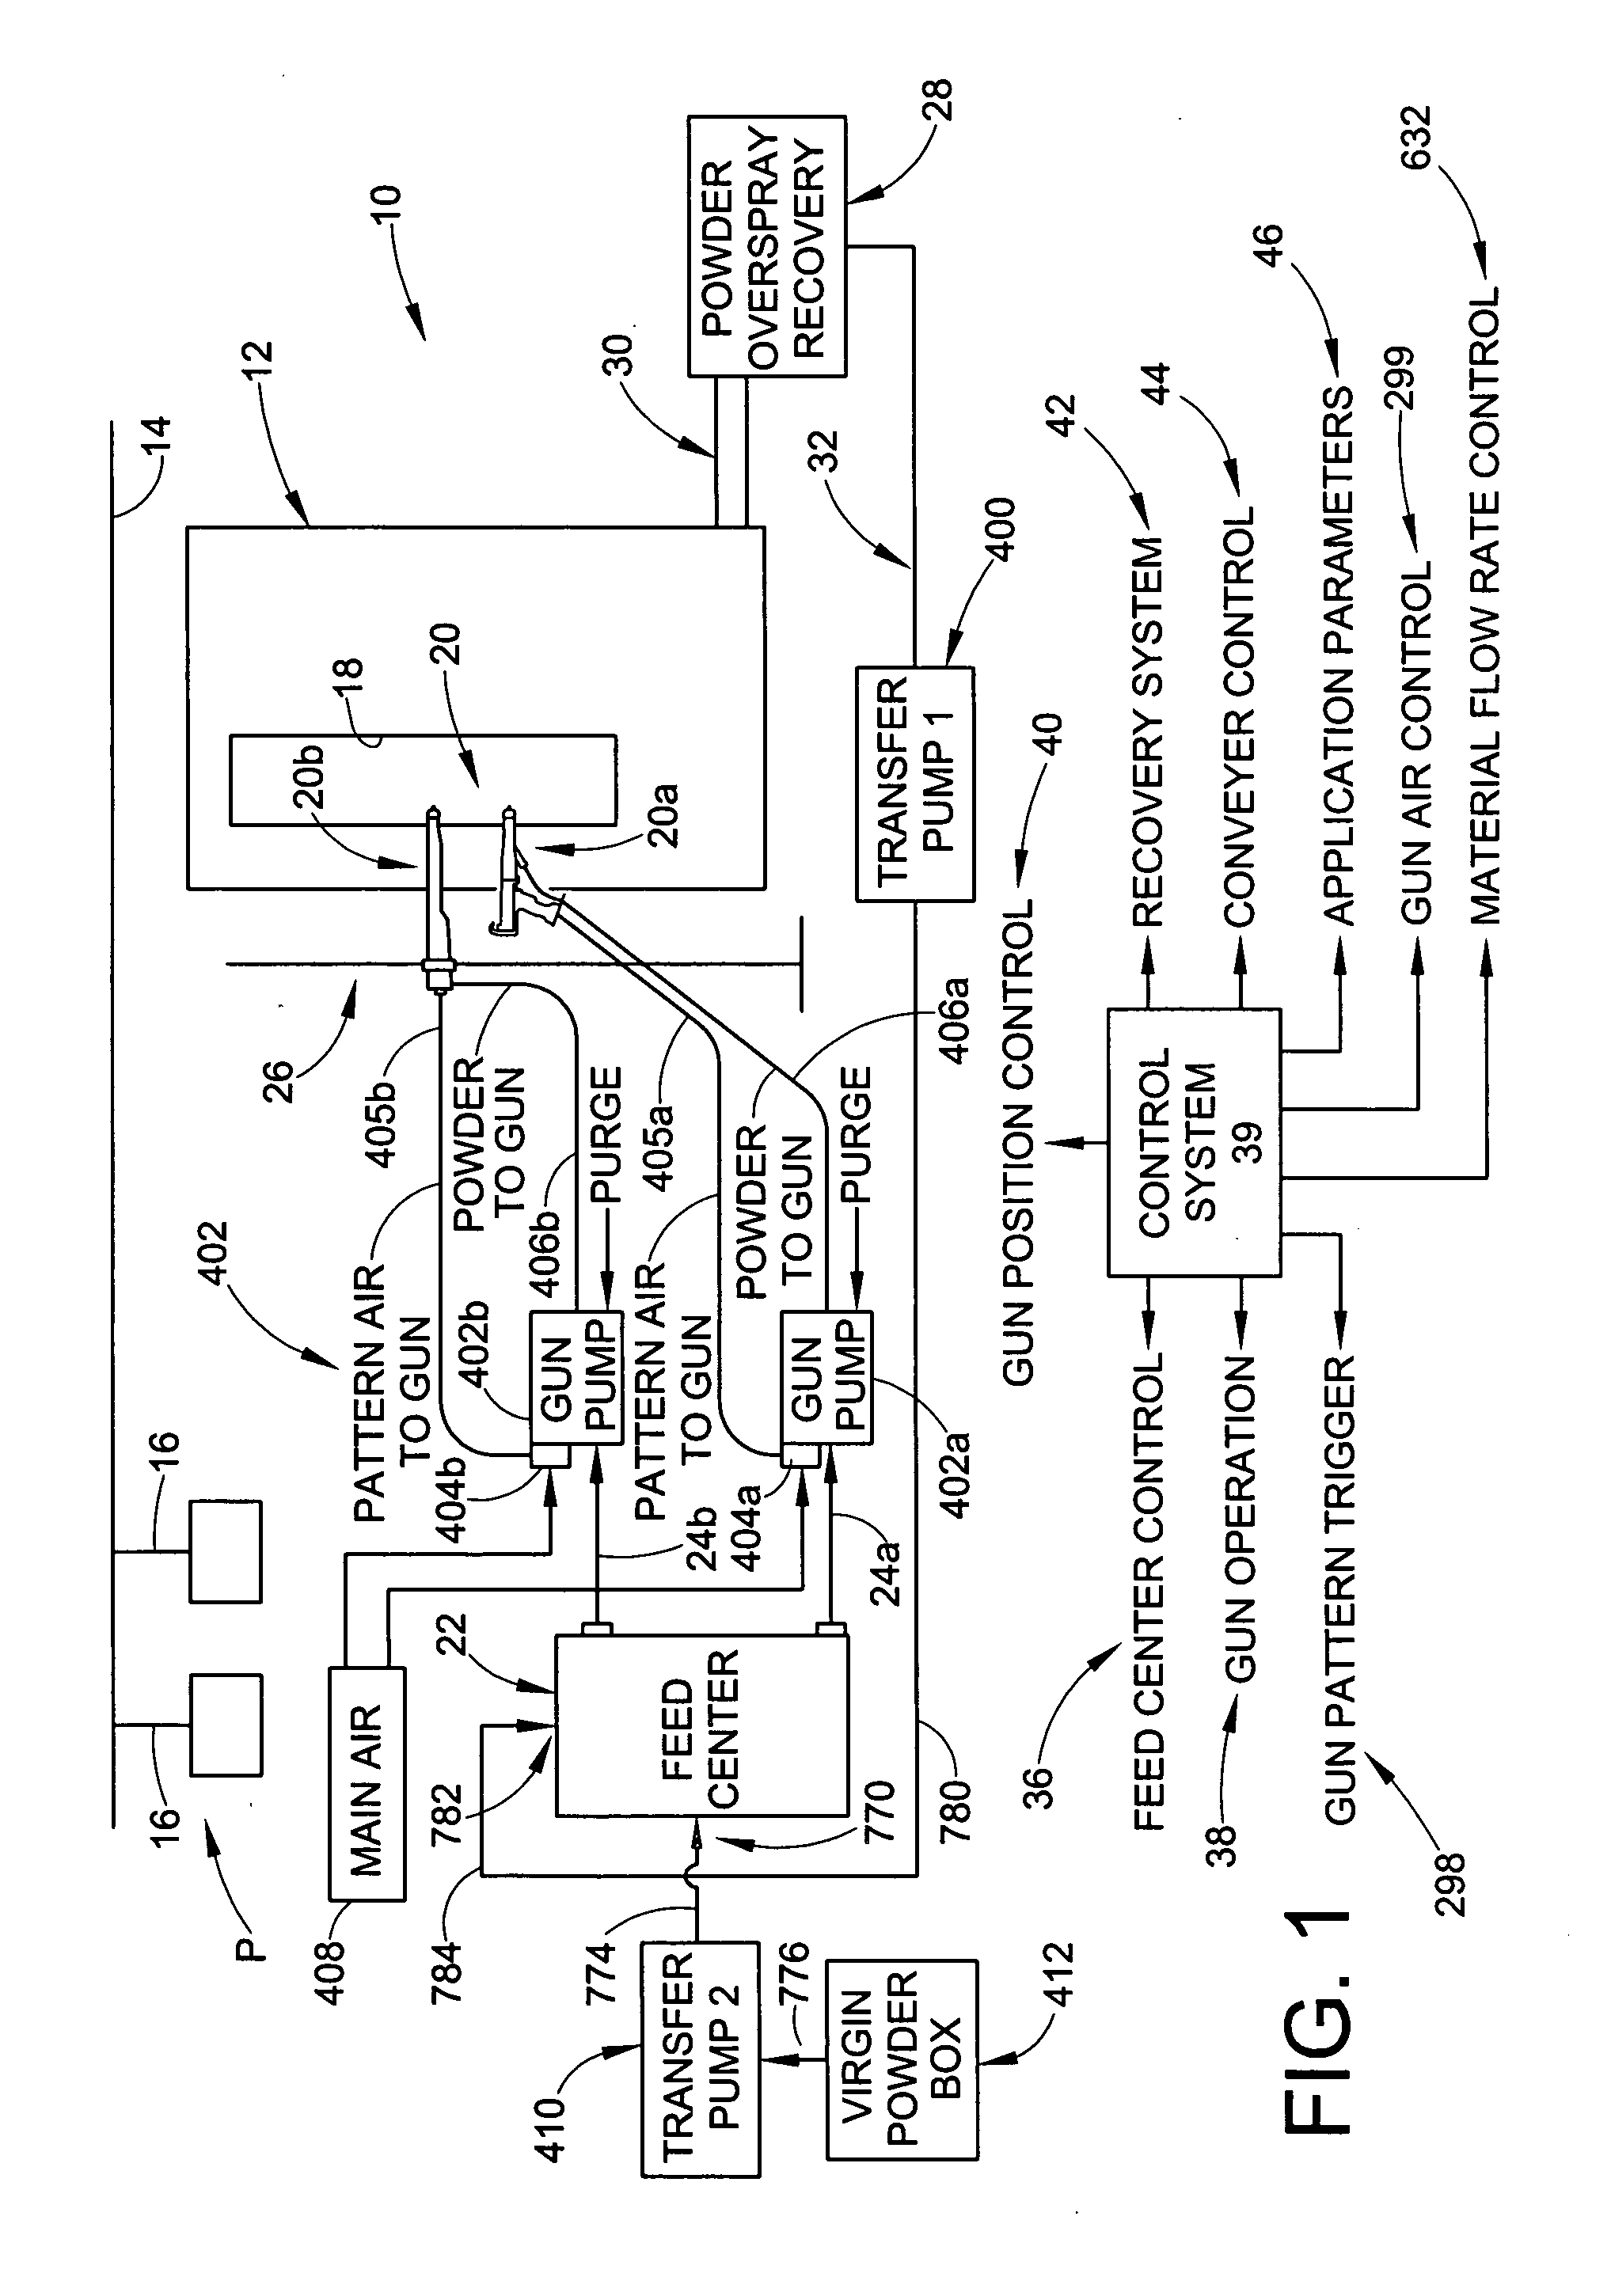 Improved particulate material application system